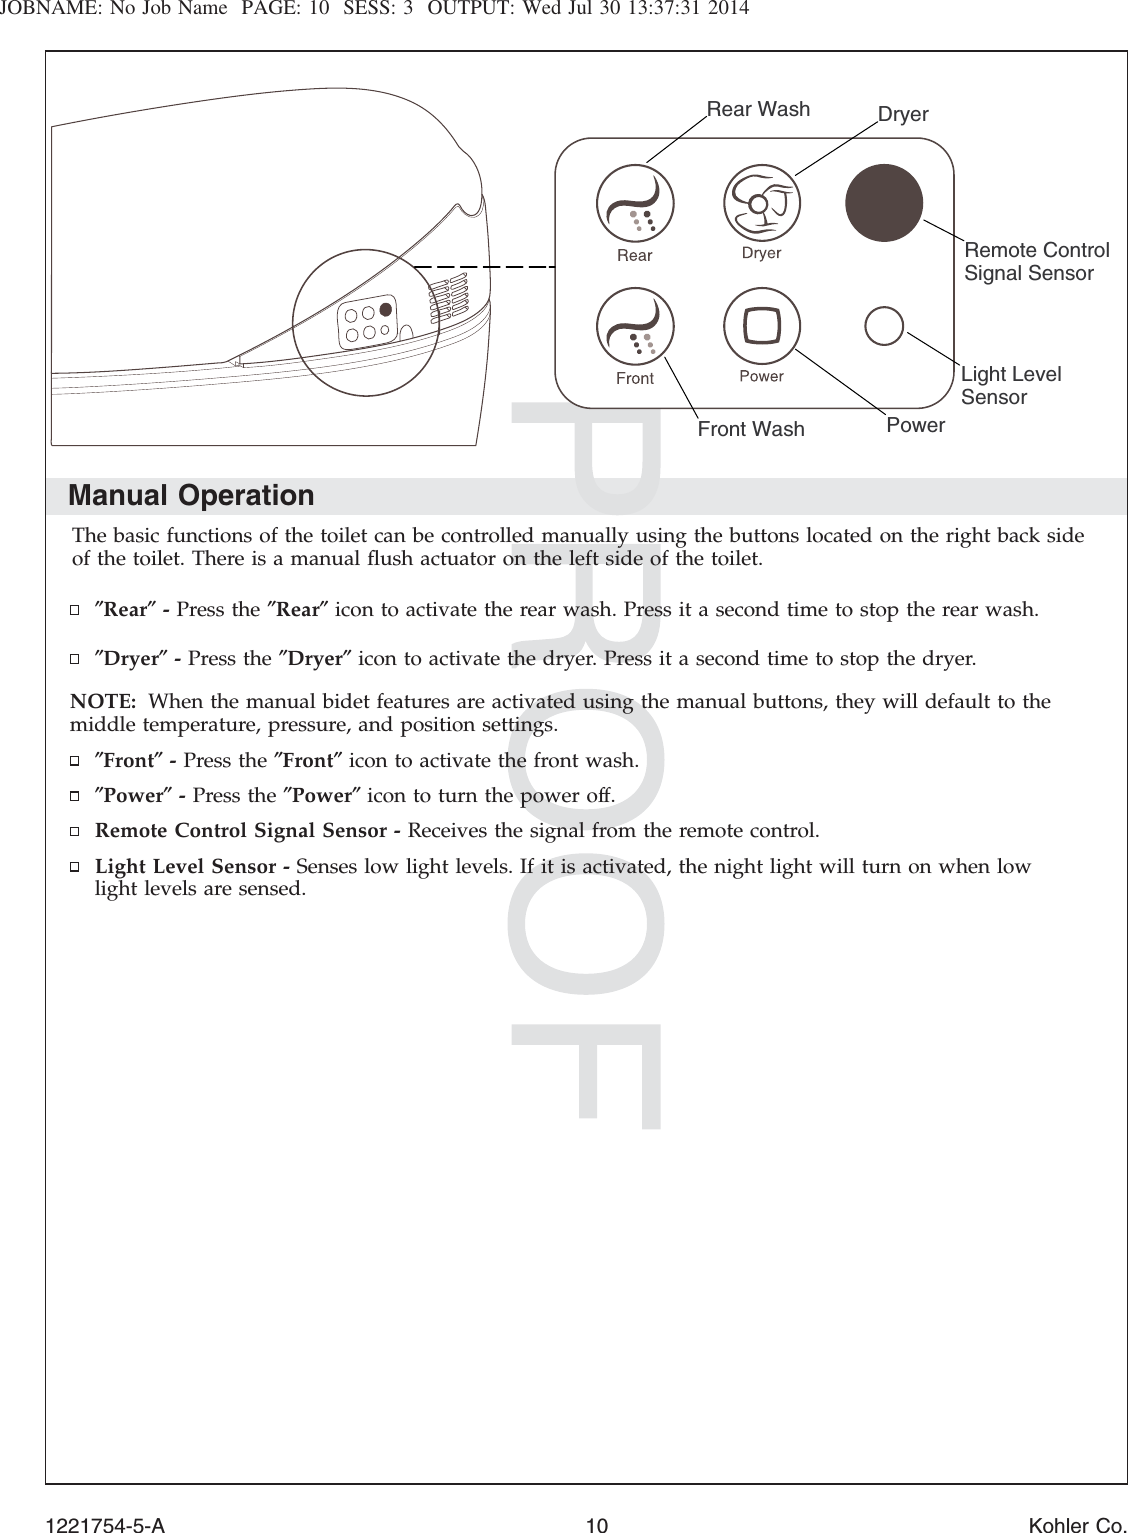 JOBNAME: No Job Name PAGE: 10 SESS: 3 OUTPUT: Wed Jul 30 13:37:31 2014Manual OperationThe basic functions of the toilet can be controlled manually using the buttons located on the right back sideof the toilet. There is a manual ﬂush actuator on the left side of the toilet.″Rear″-Press the ″Rear″icon to activate the rear wash. Press it a second time to stop the rear wash.″Dryer″-Press the ″Dryer″icon to activate the dryer. Press it a second time to stop the dryer.NOTE: When the manual bidet features are activated using the manual buttons, they will default to themiddle temperature, pressure, and position settings.″Front″-Press the ″Front″icon to activate the front wash.″Power″-Press the ″Power″icon to turn the power off.Remote Control Signal Sensor - Receives the signal from the remote control.Light Level Sensor - Senses low light levels. If it is activated, the night light will turn on when lowlight levels are sensed.DryerFront WashRear WashLight Level Sensor PowerRemote Control Signal Sensor1221754-5-A 10 Kohler Co.